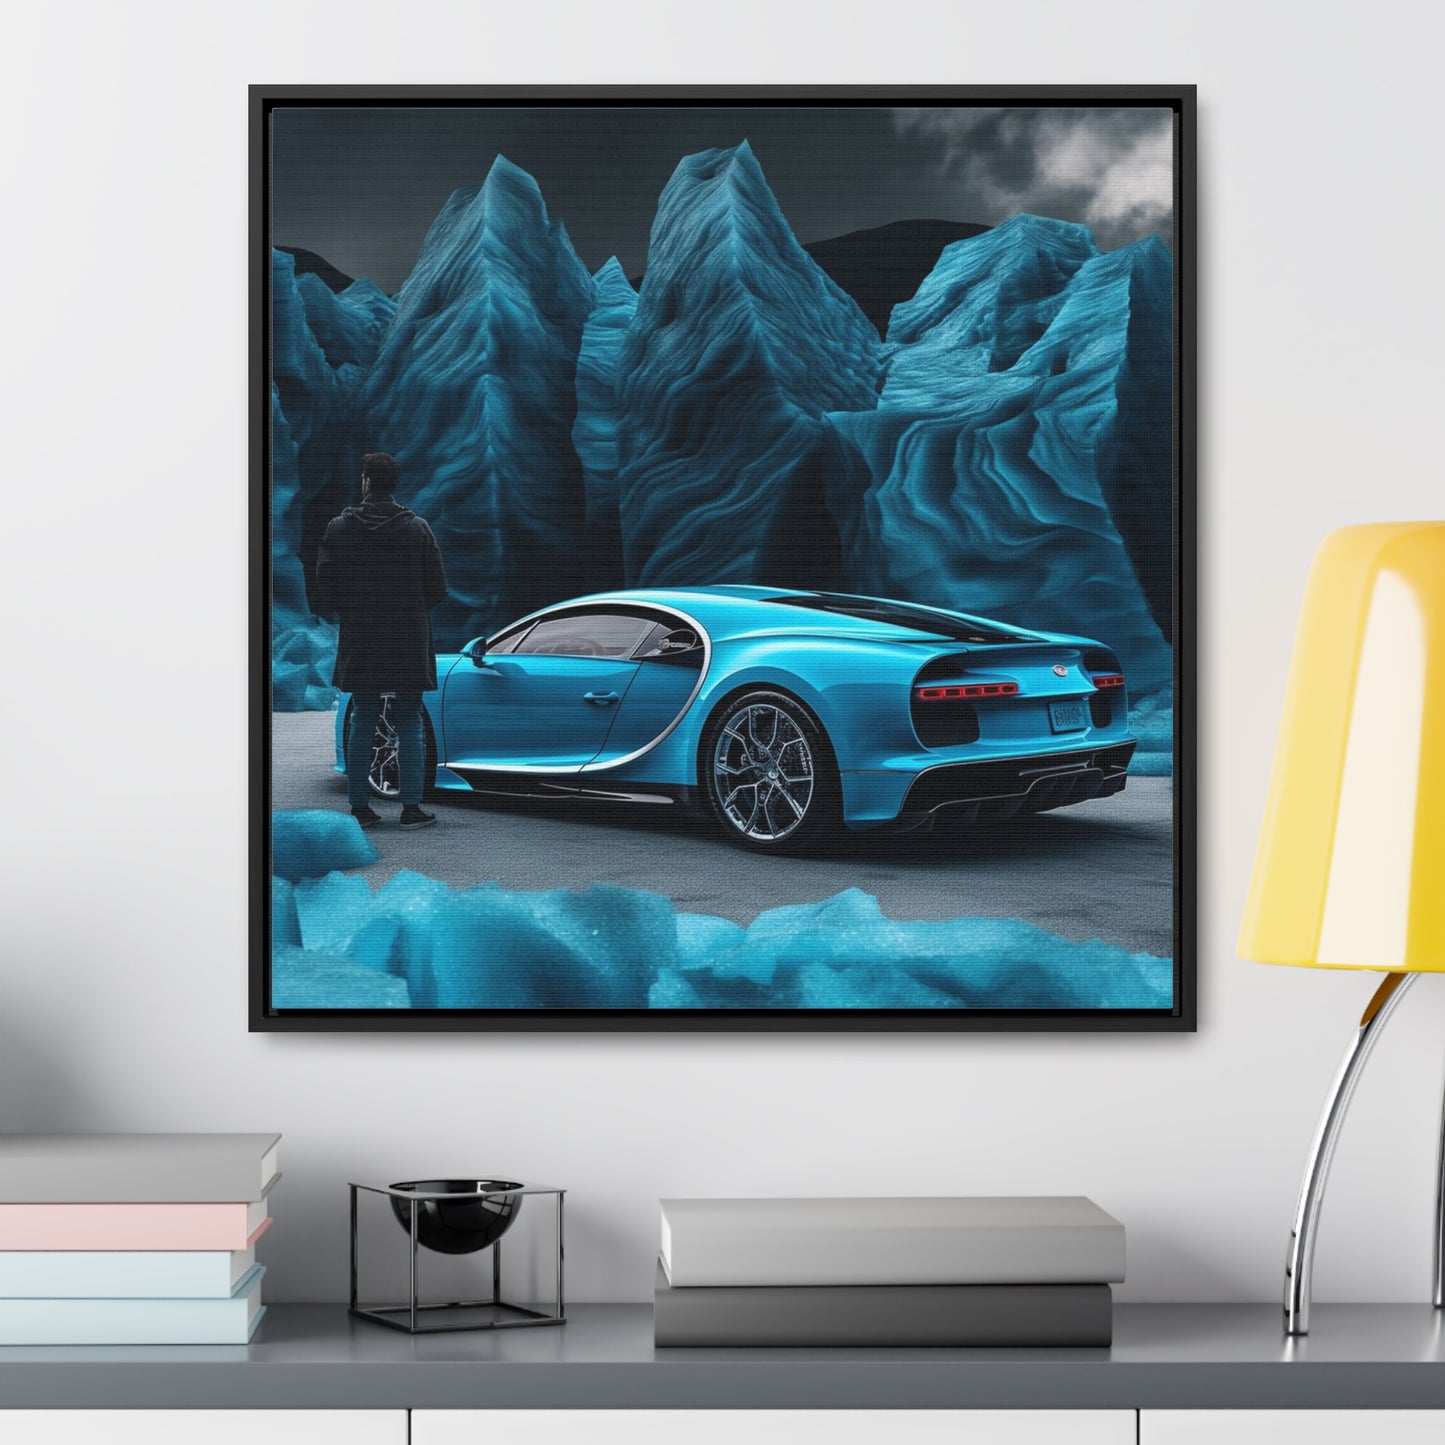 Gallery Canvas Wraps, Square Frame Bugatti Real Look 3